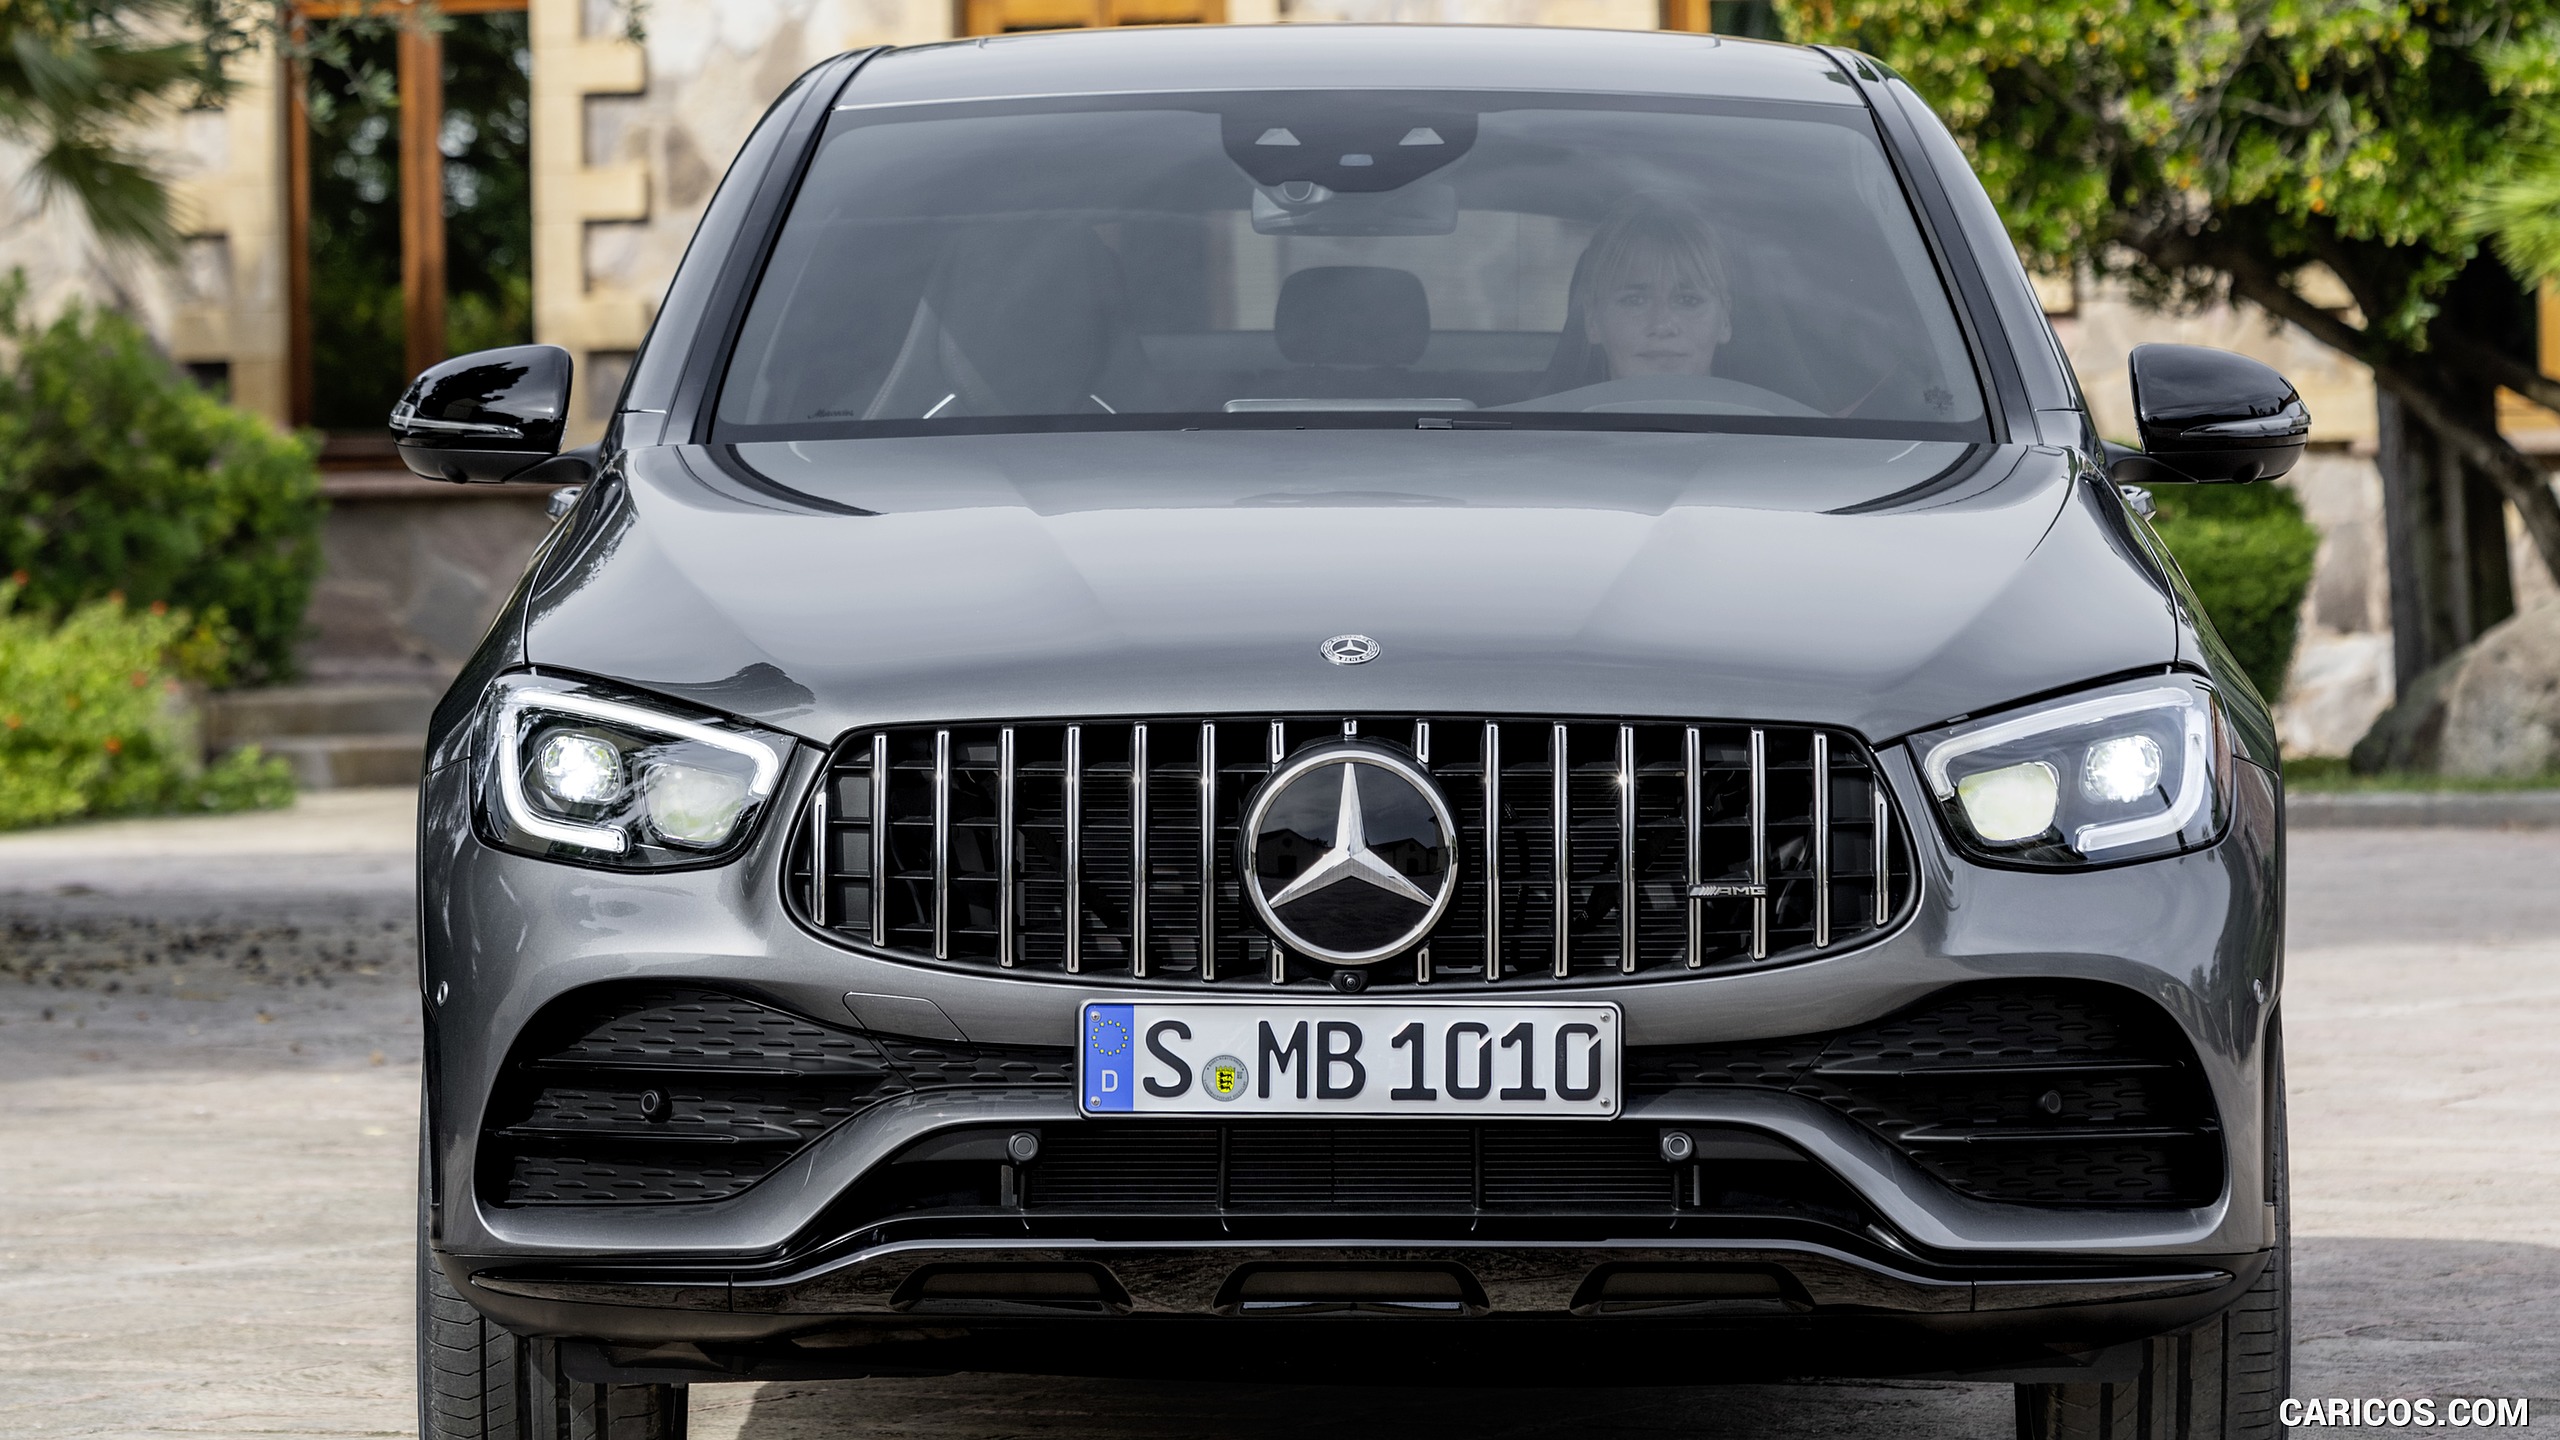 2020 Mercedes-AMG GLC 43 4MATIC Coupe - Front, #18 of 173